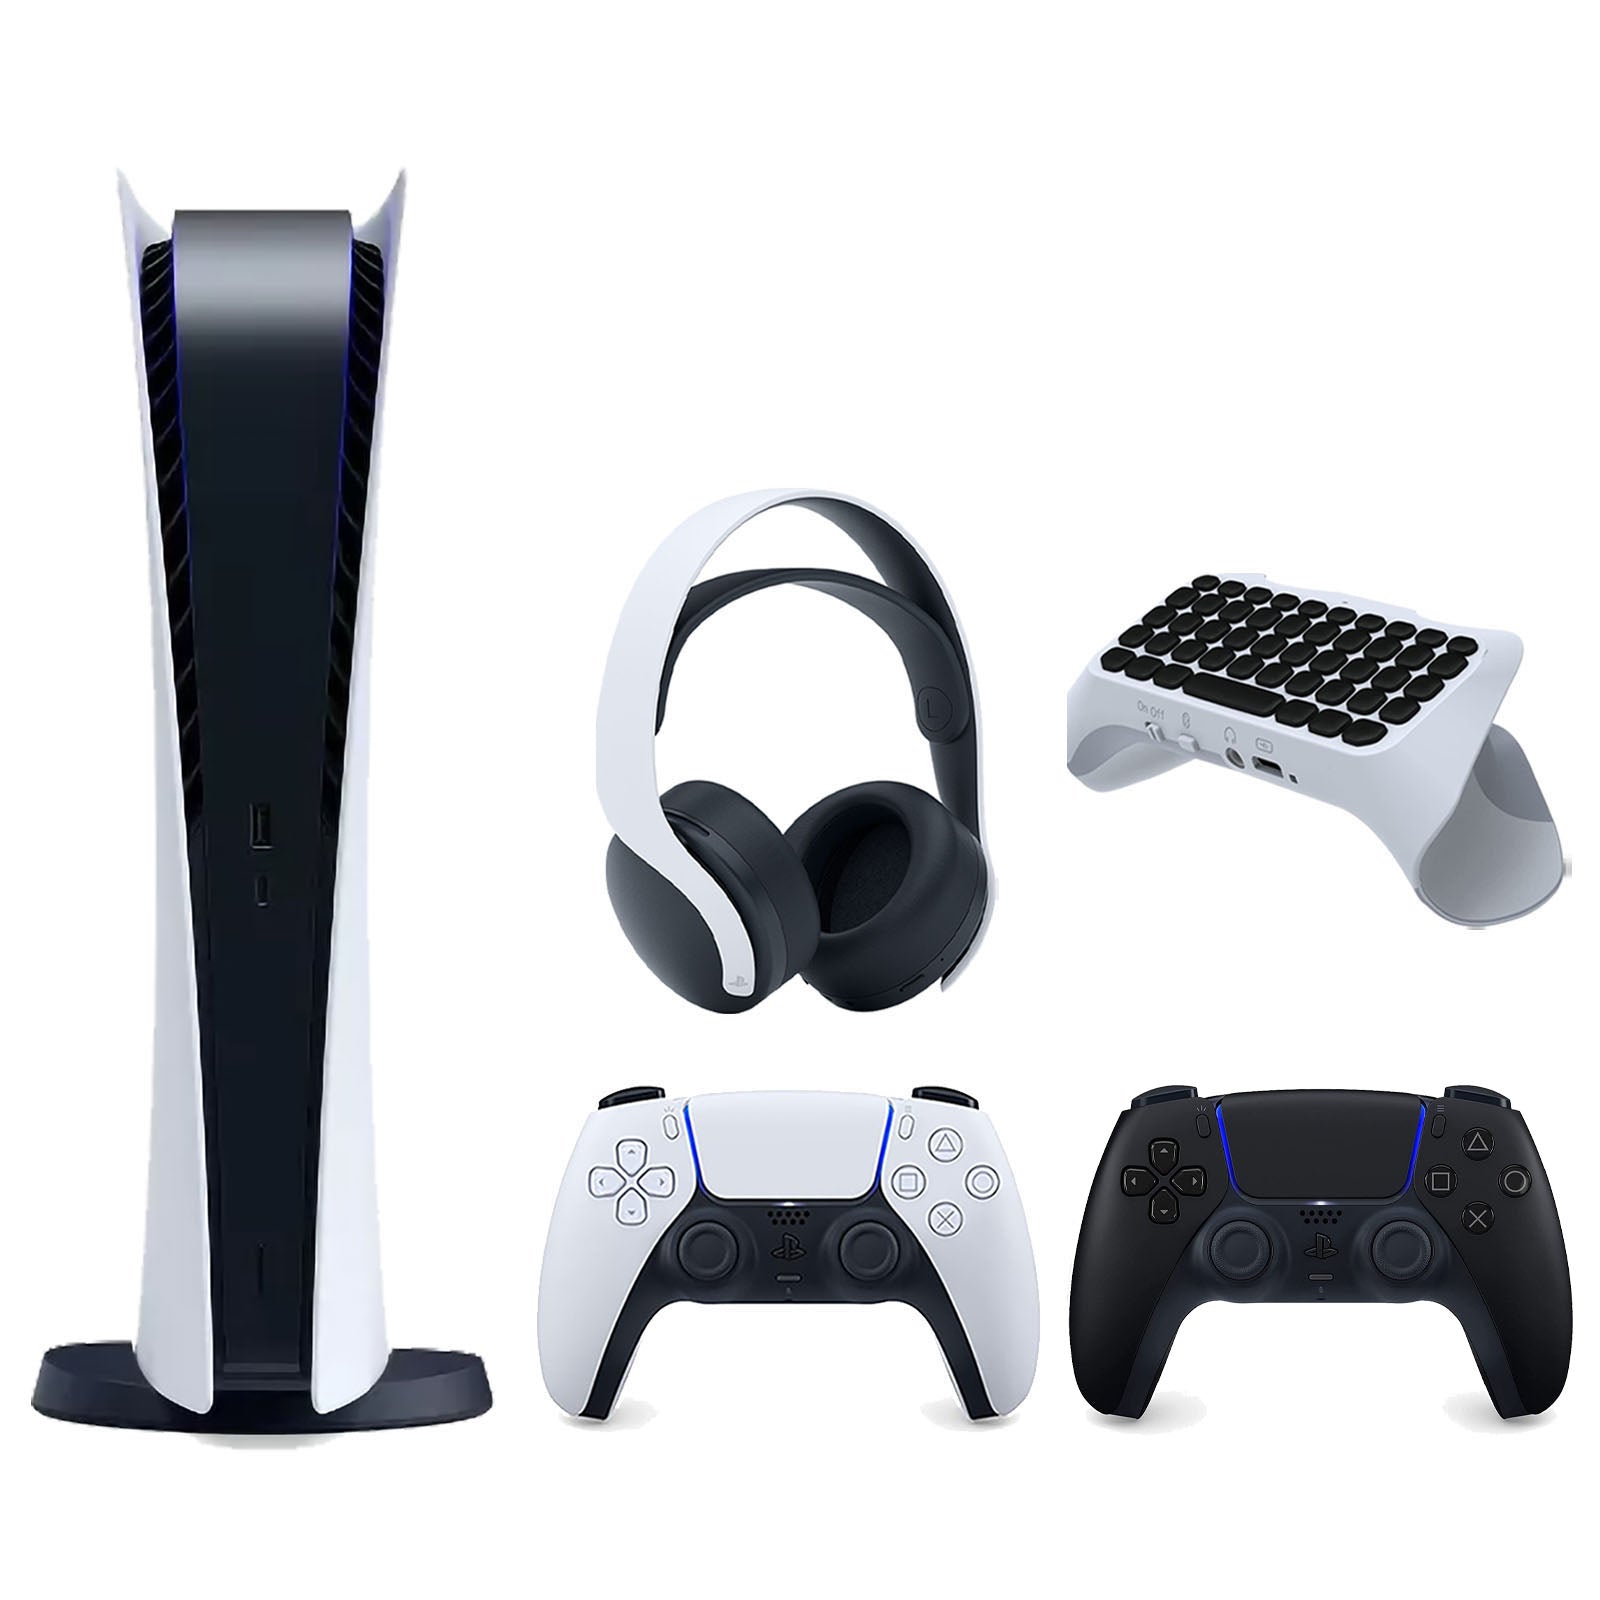 Sony Playstation 5 Digital Edition Console with Extra Black Controller, White PULSE 3D Headset and Surge QuickType 2.0 Wireless PS5 Controller Keypad Bundle - Pro-Distributing